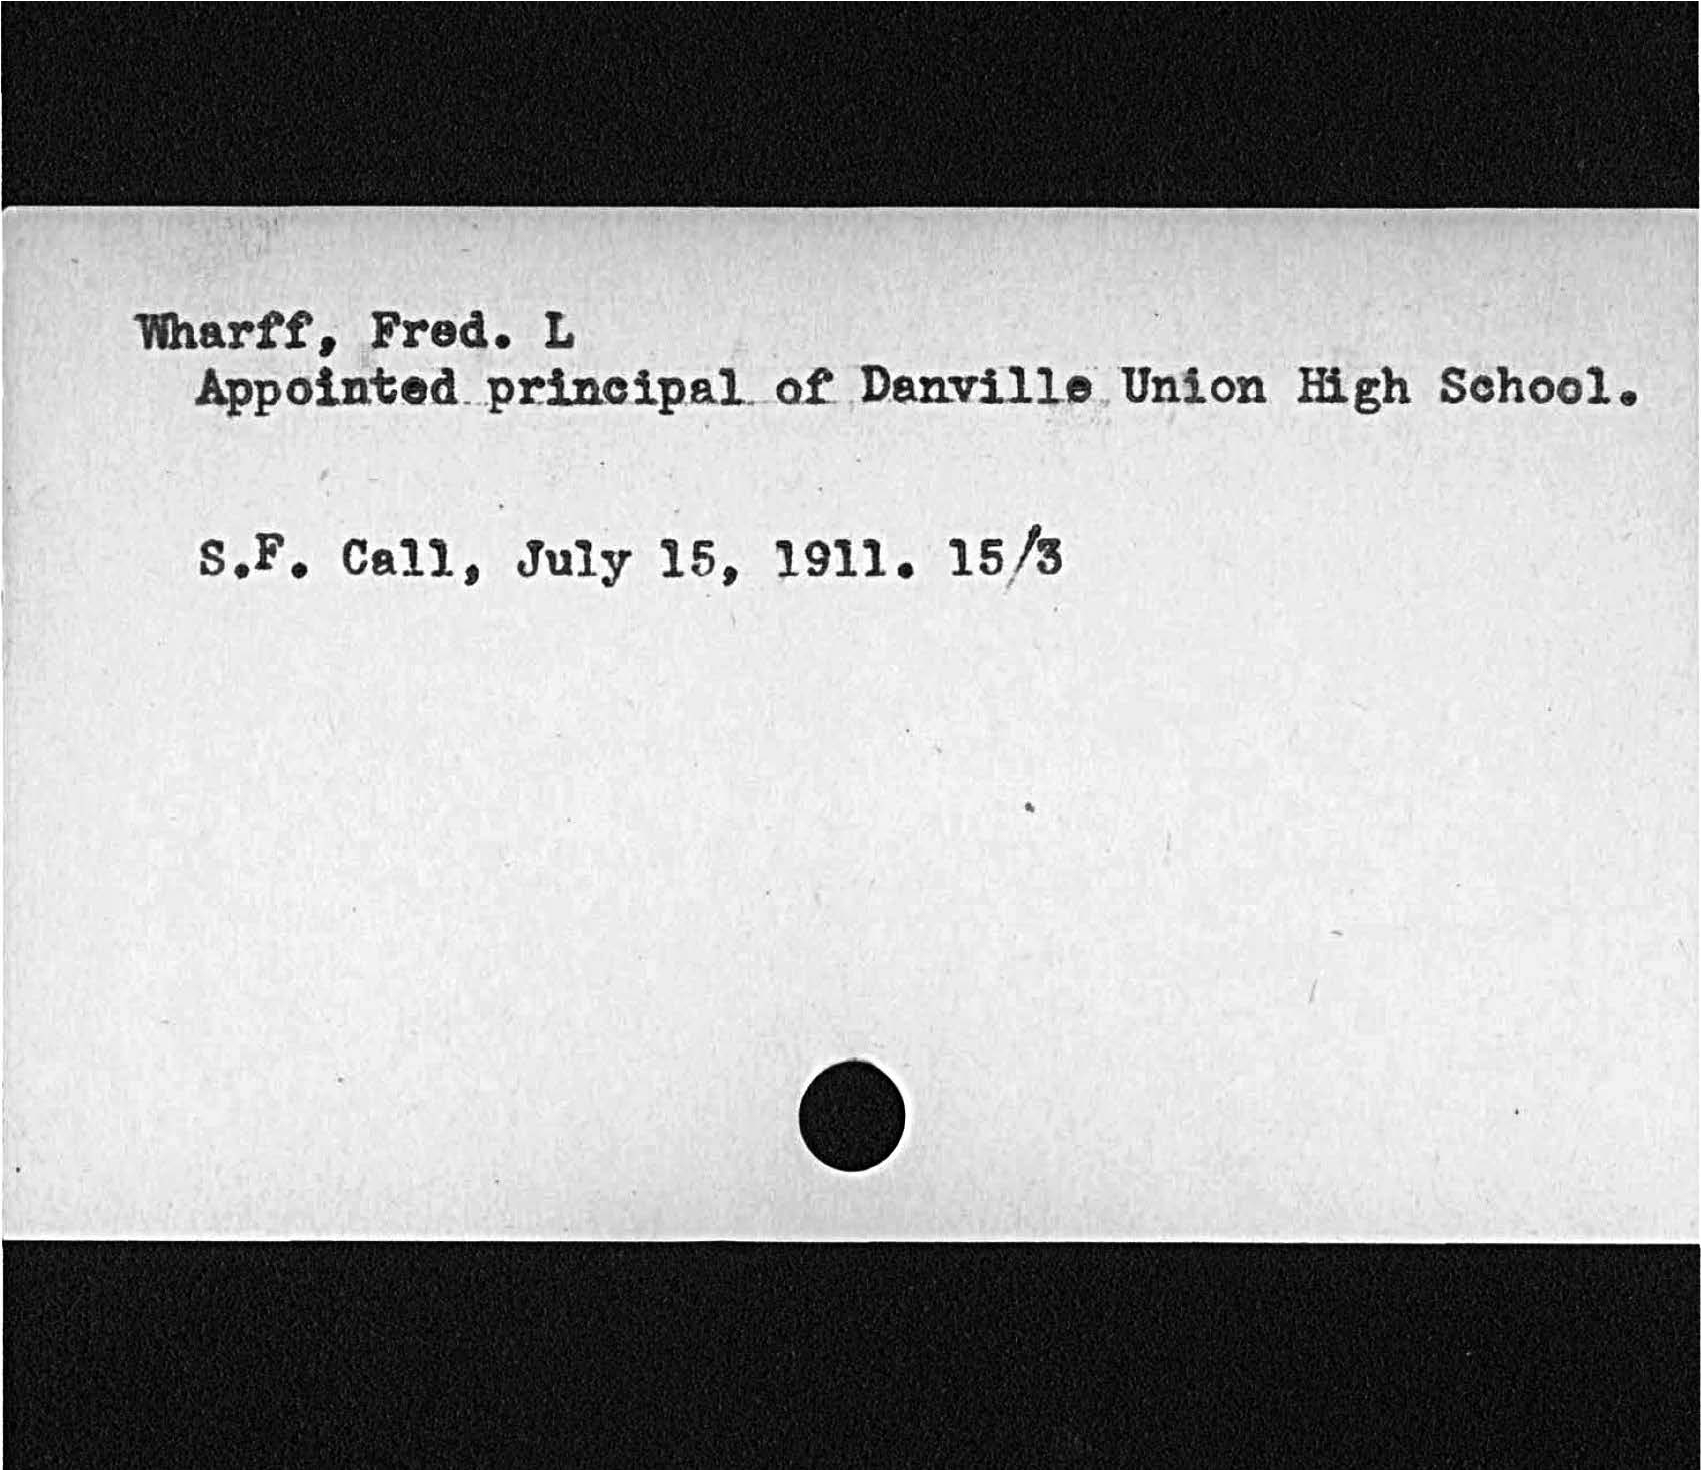 Wharff, Fred. LAppointed, principal, of Danville Union High SchoolS. F. Call, July 15, 1911. 15/ S